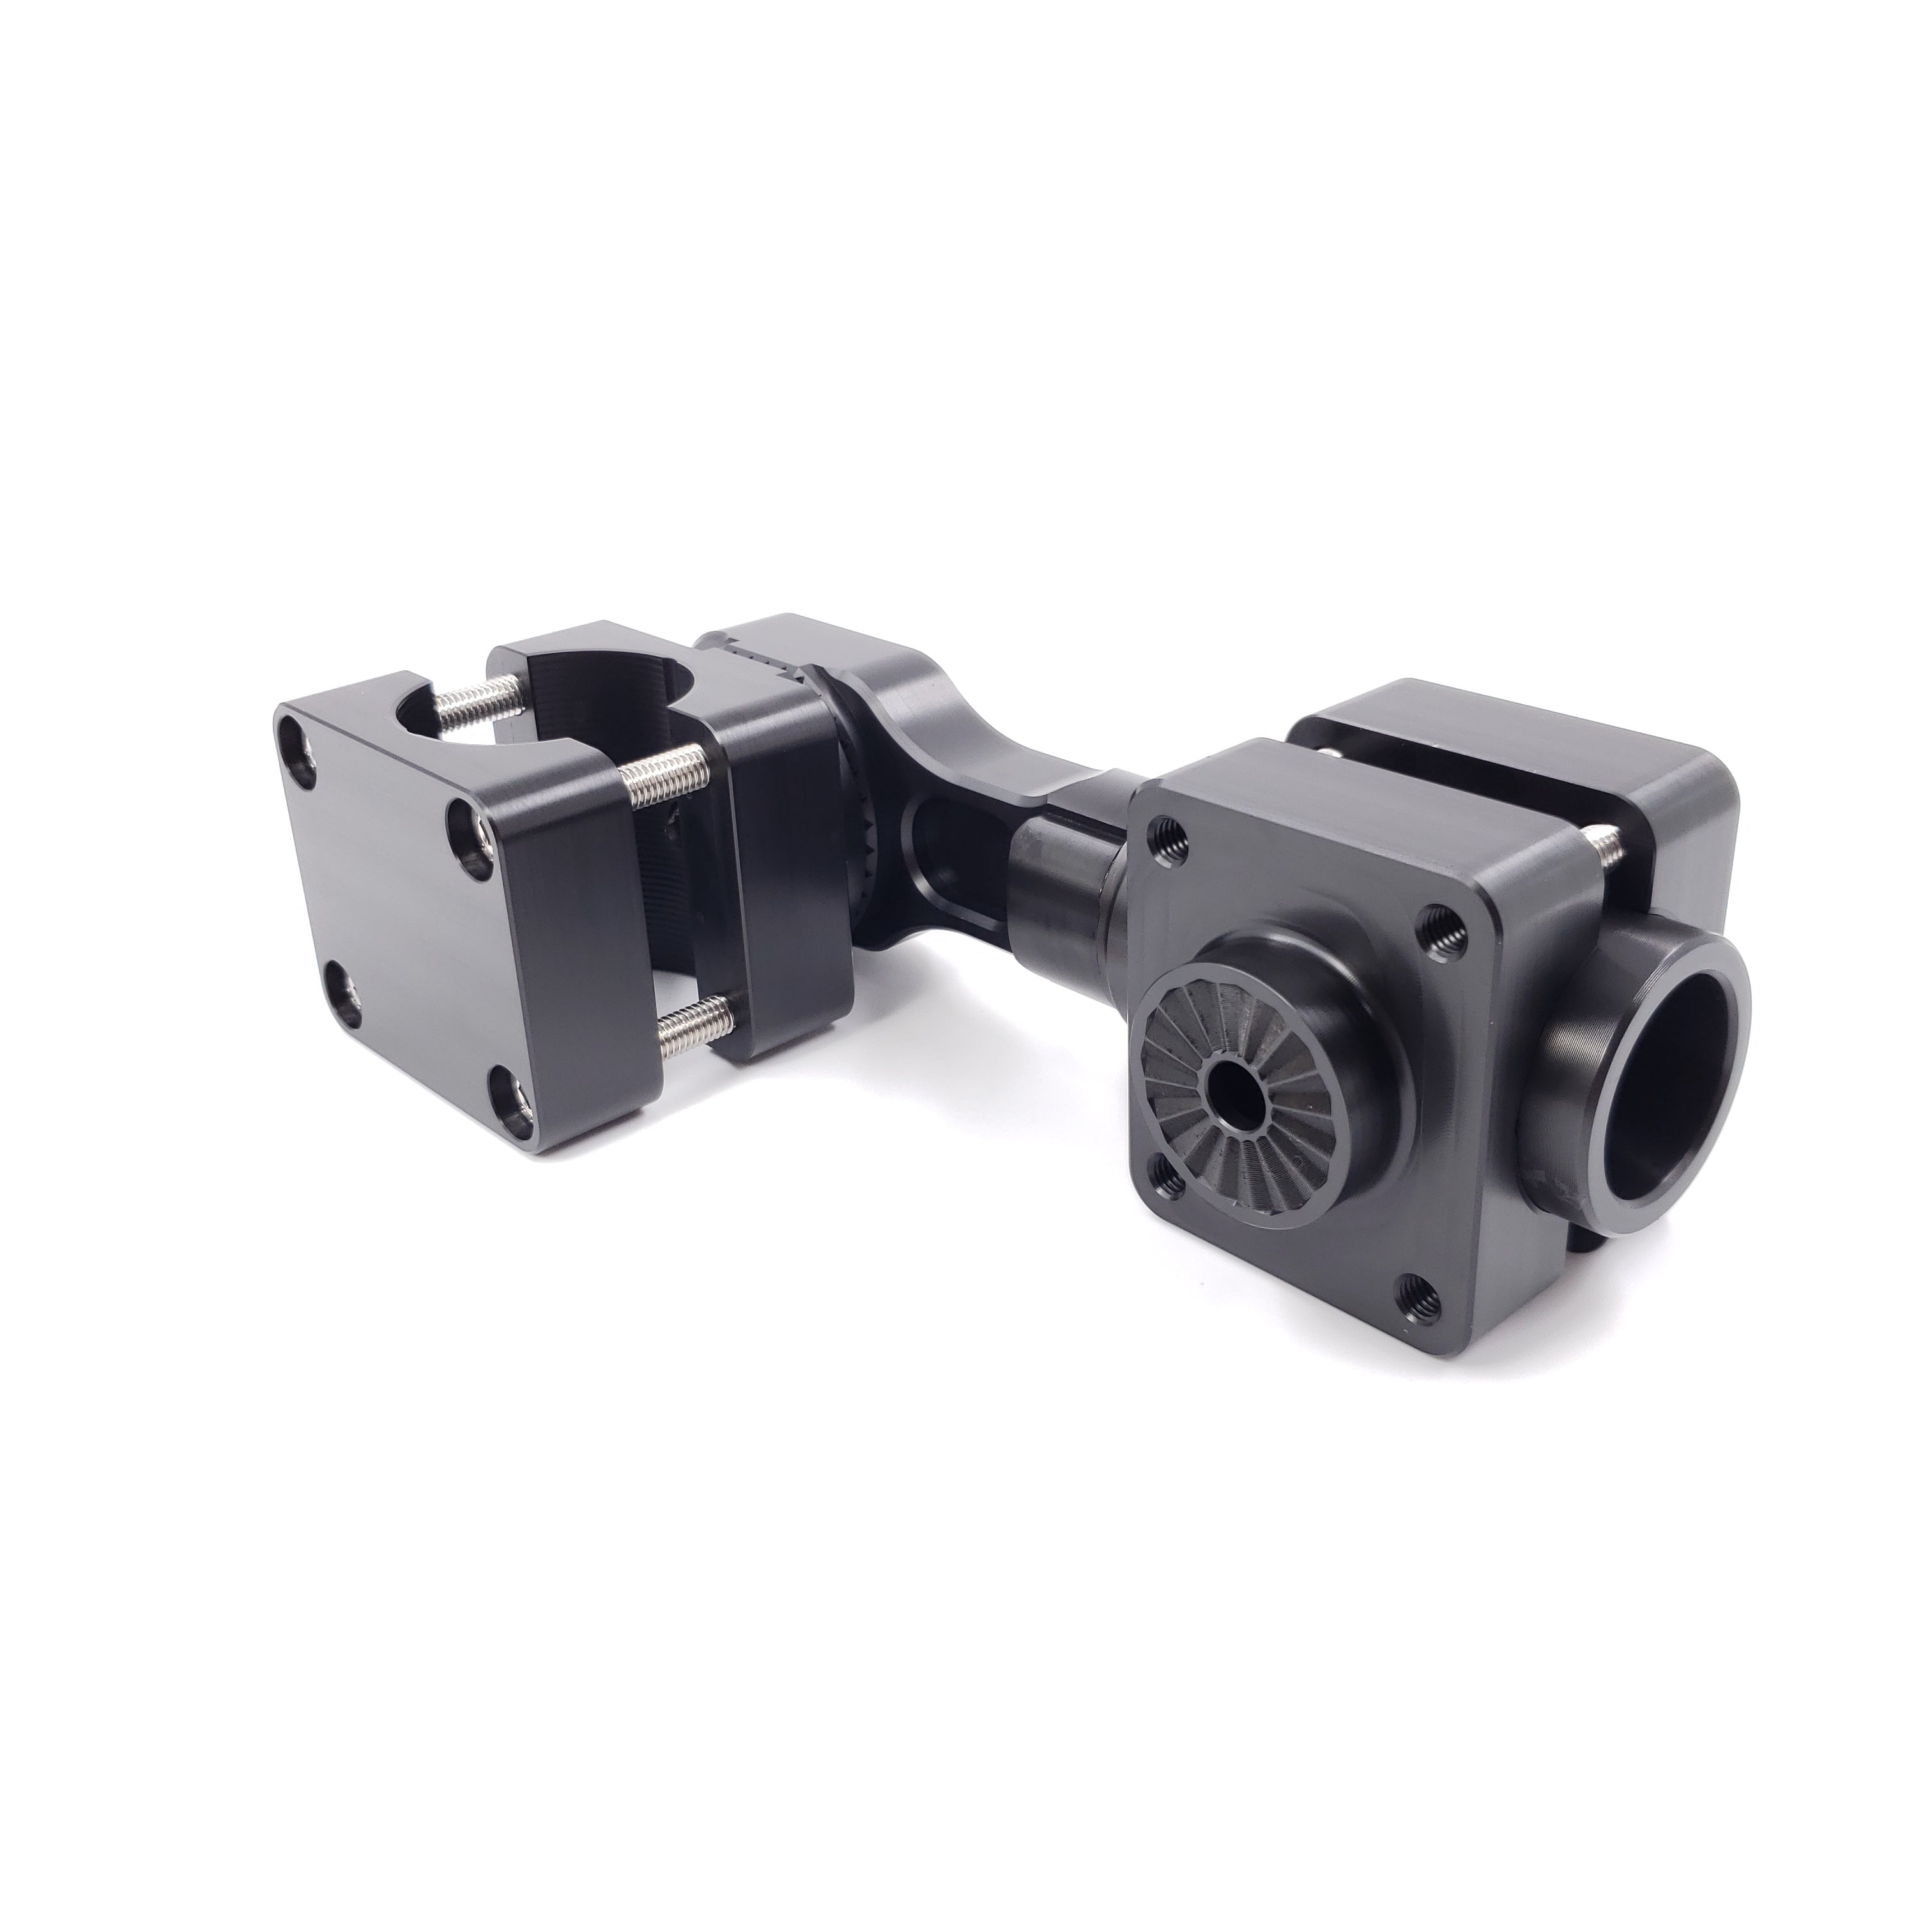 Gfab engineering - 💥 Attention livescope users💥 Due to Garmin changing  sizing on the new LV34 transducer mounts, any poles purchased prior to the  date of 01/05/2022 we will need to updated